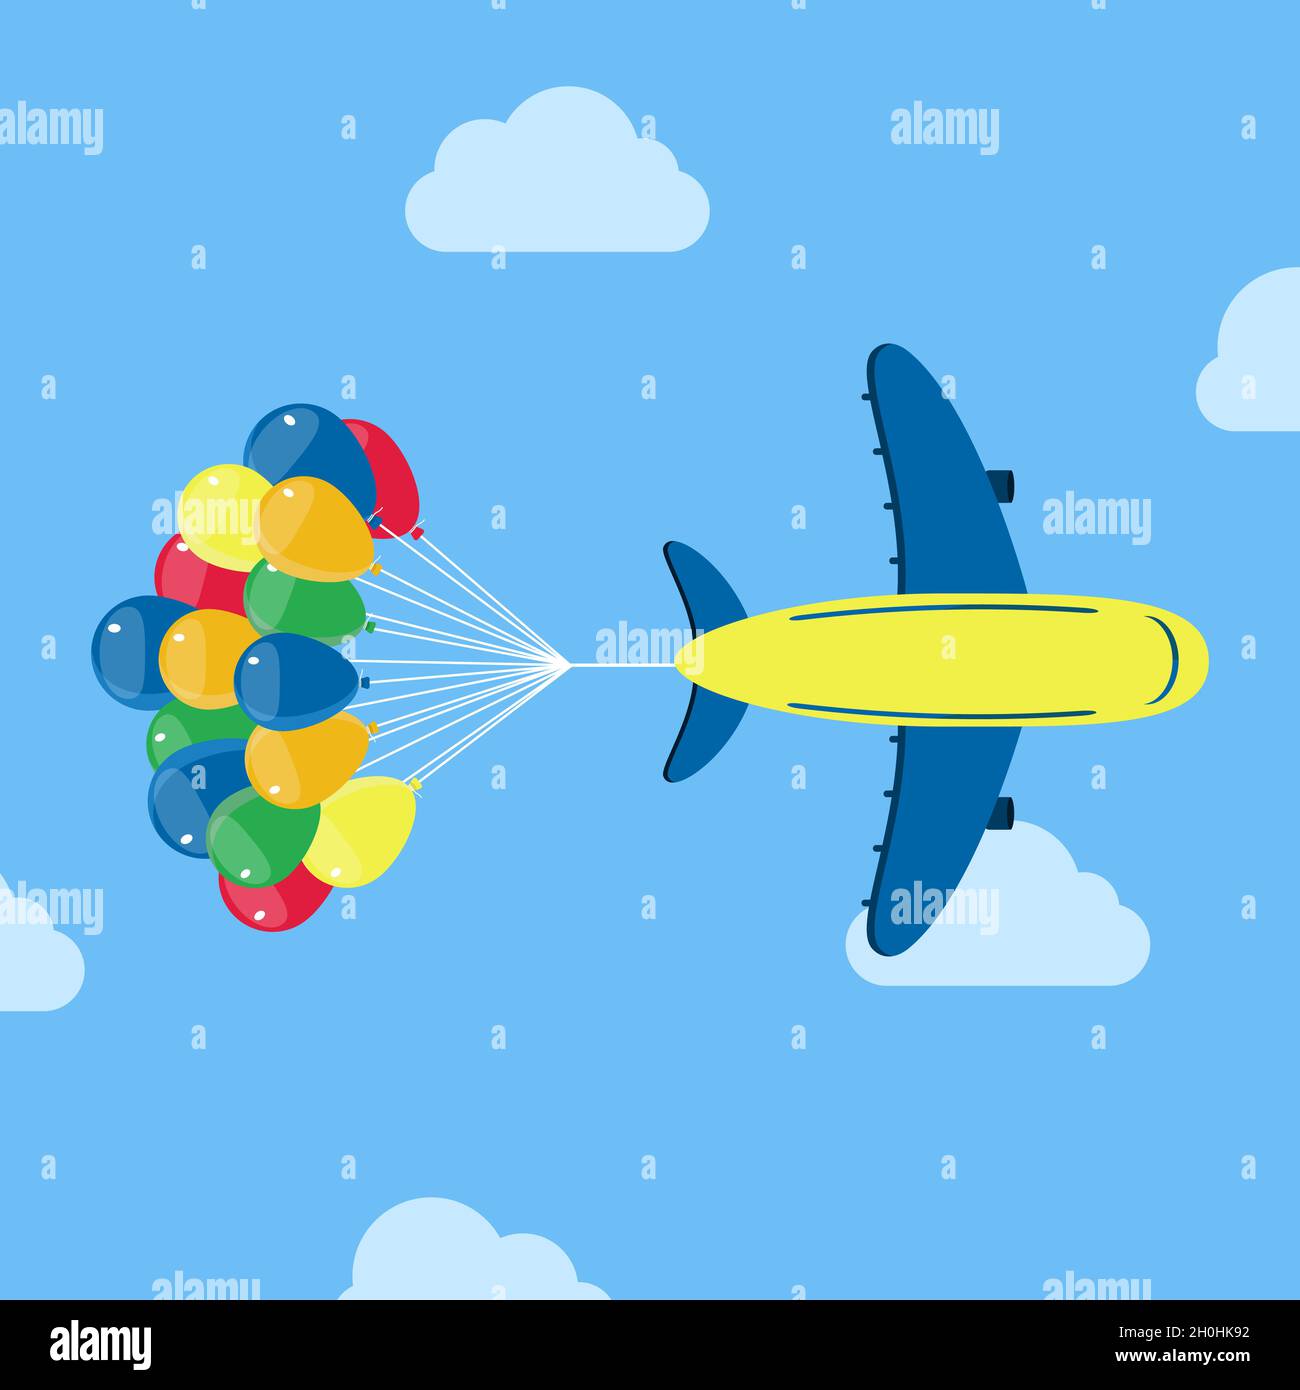 Plane flying with a group of helium balloons in the back. Conceptual vector illustration. Stock Vector